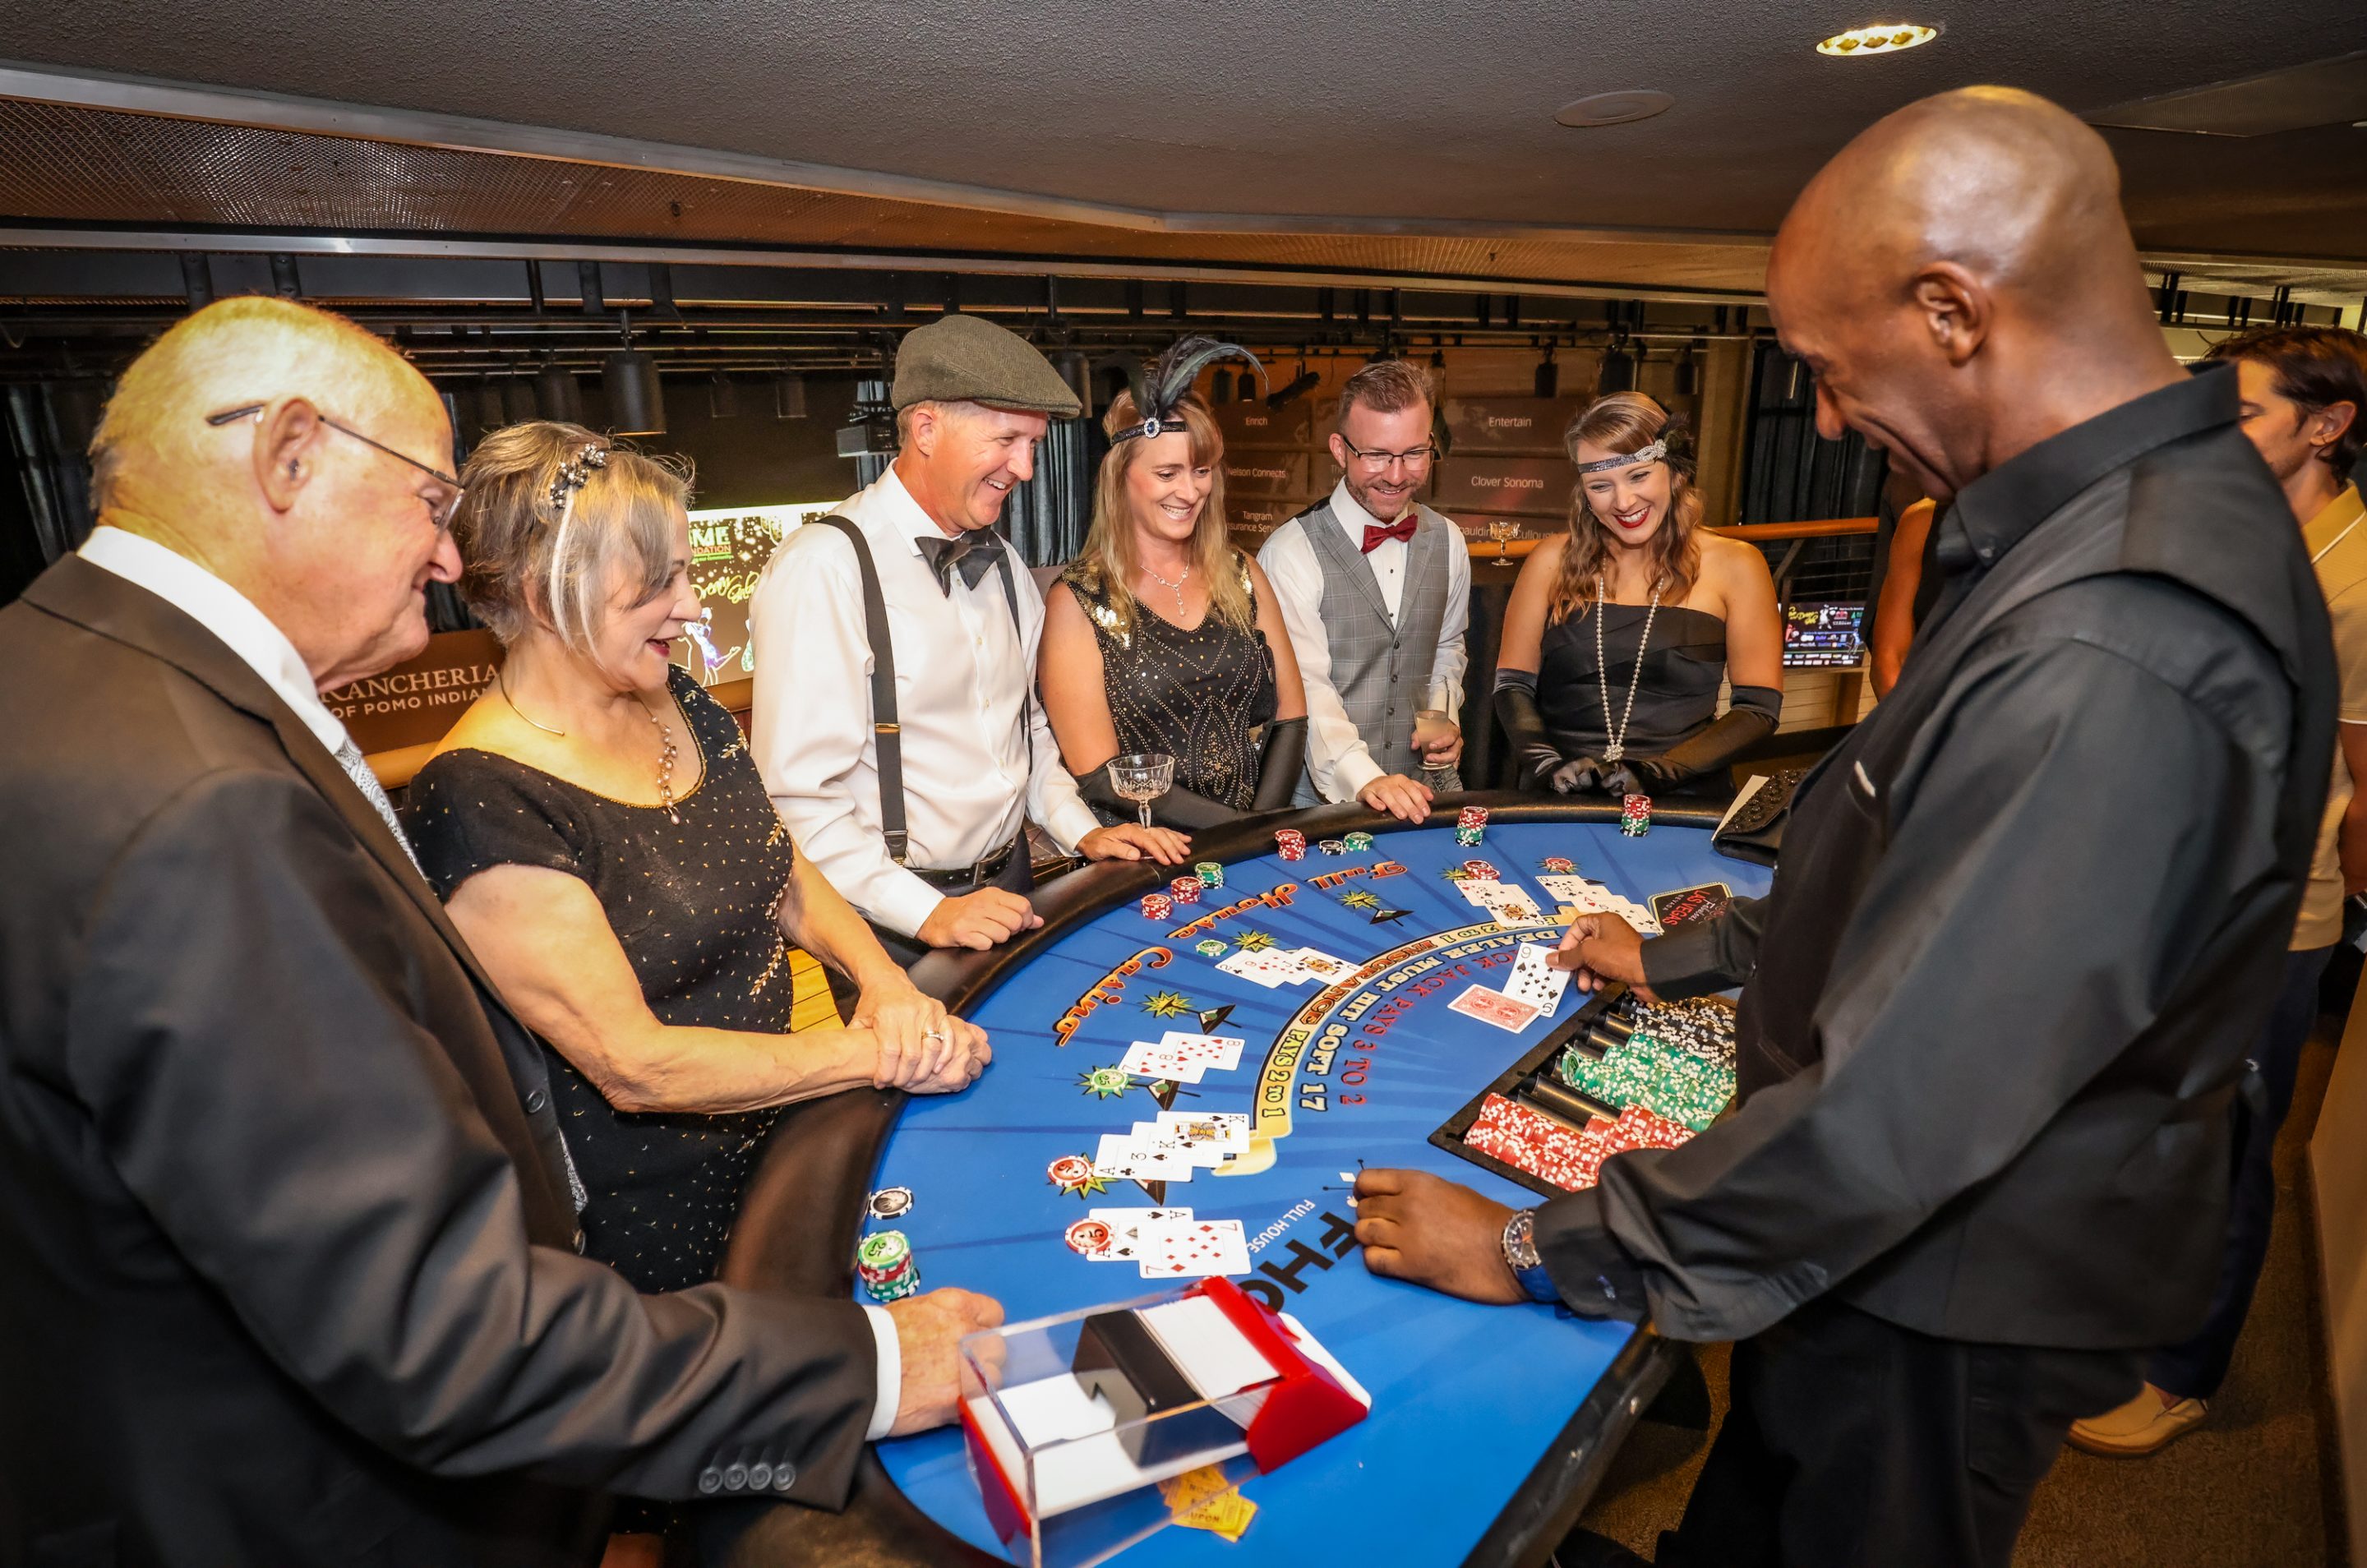 A group of people playing baccarat at a Santa Rosa non-profit event.